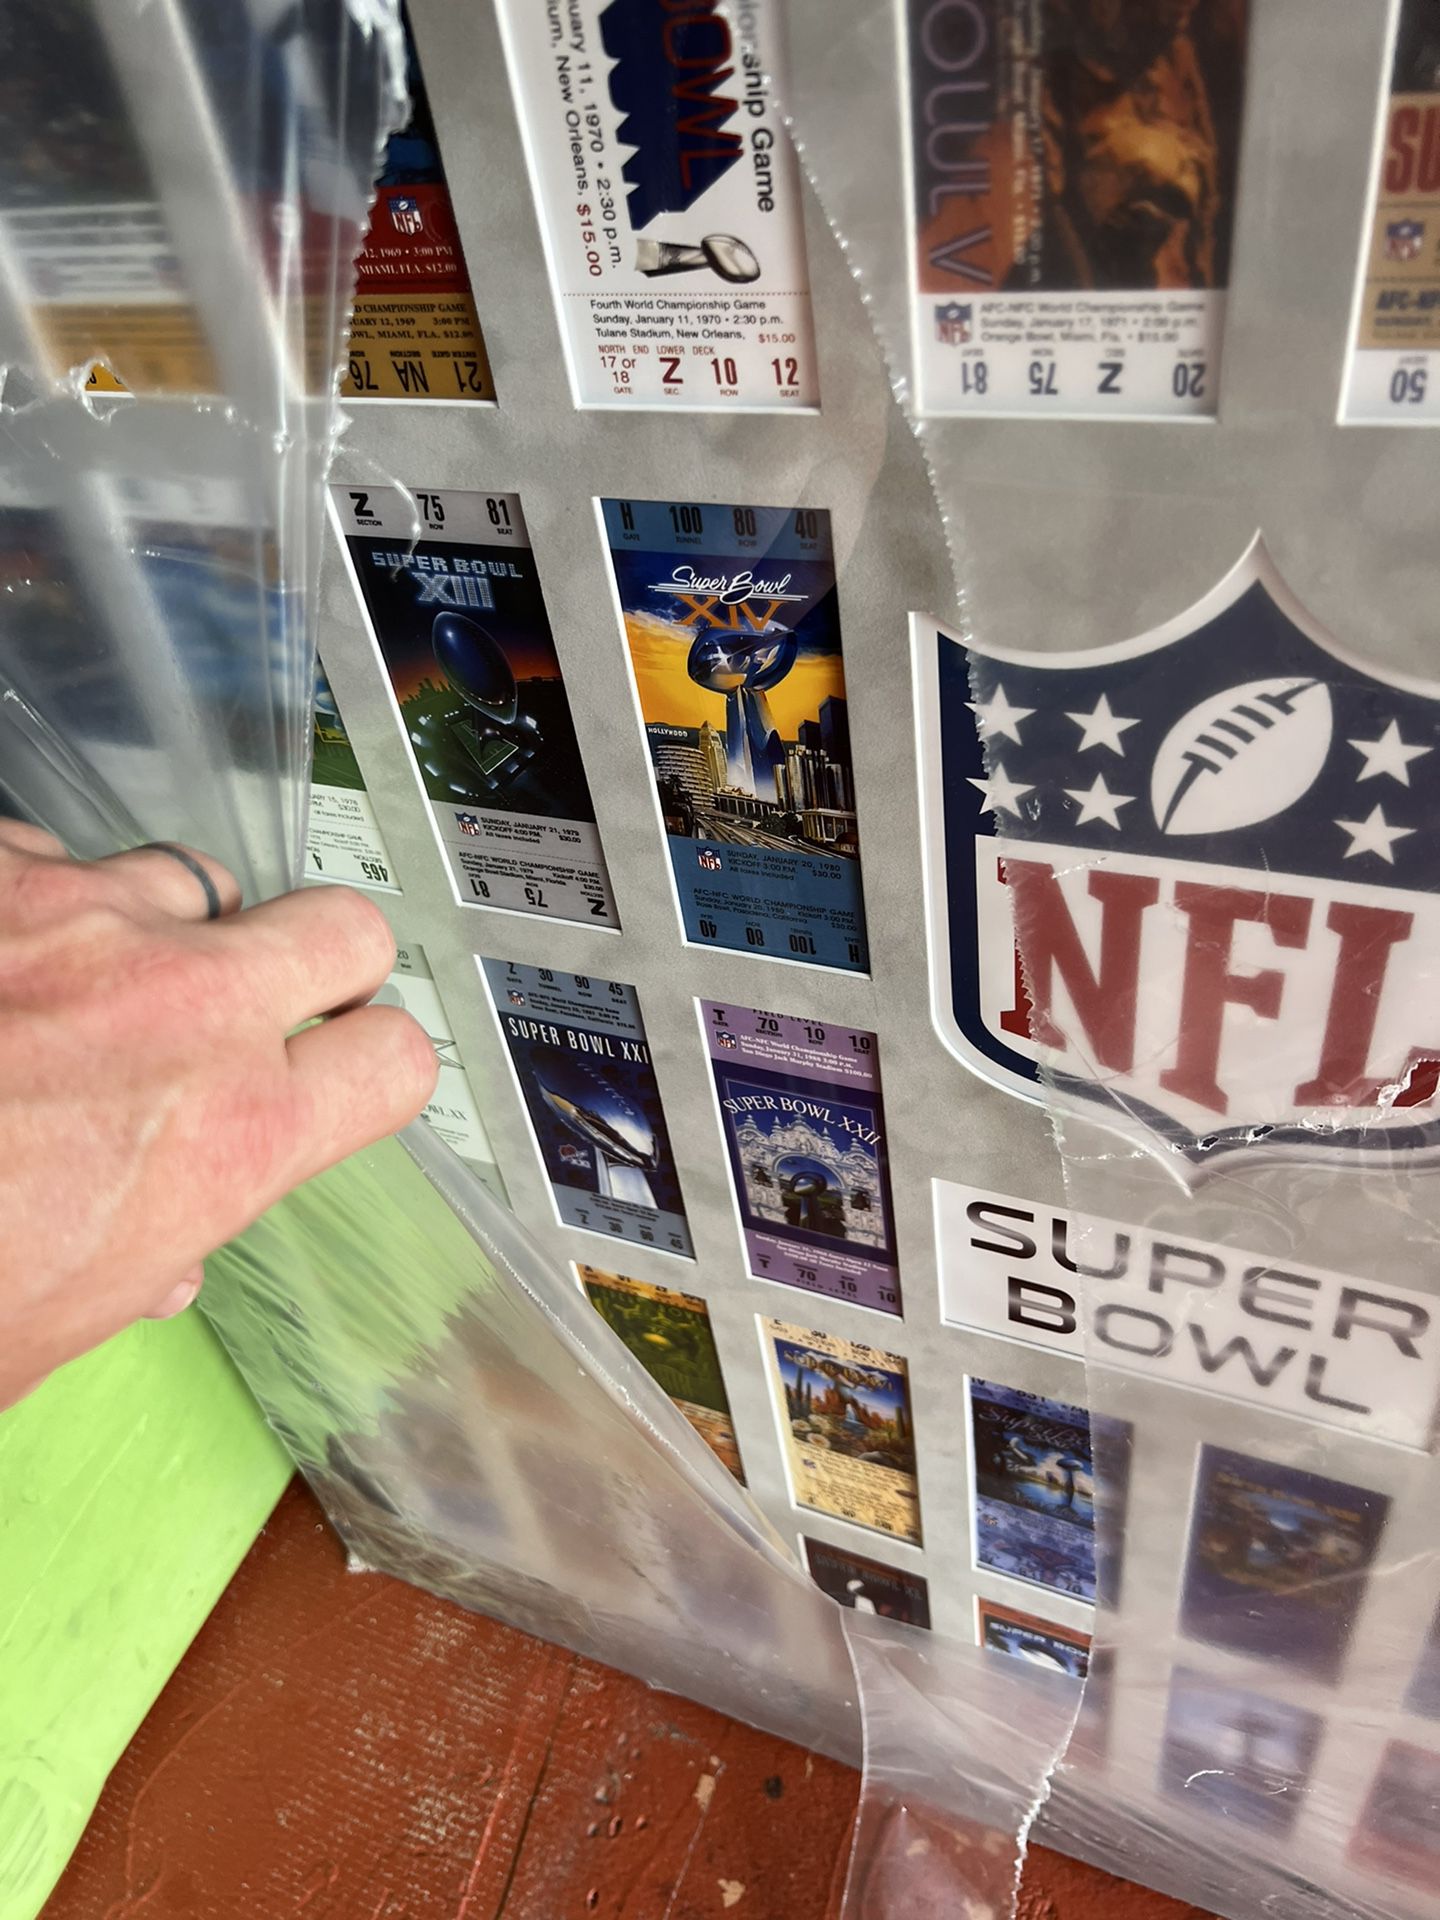 Super Bowl Ticket Stubs From 1967 To 2012 